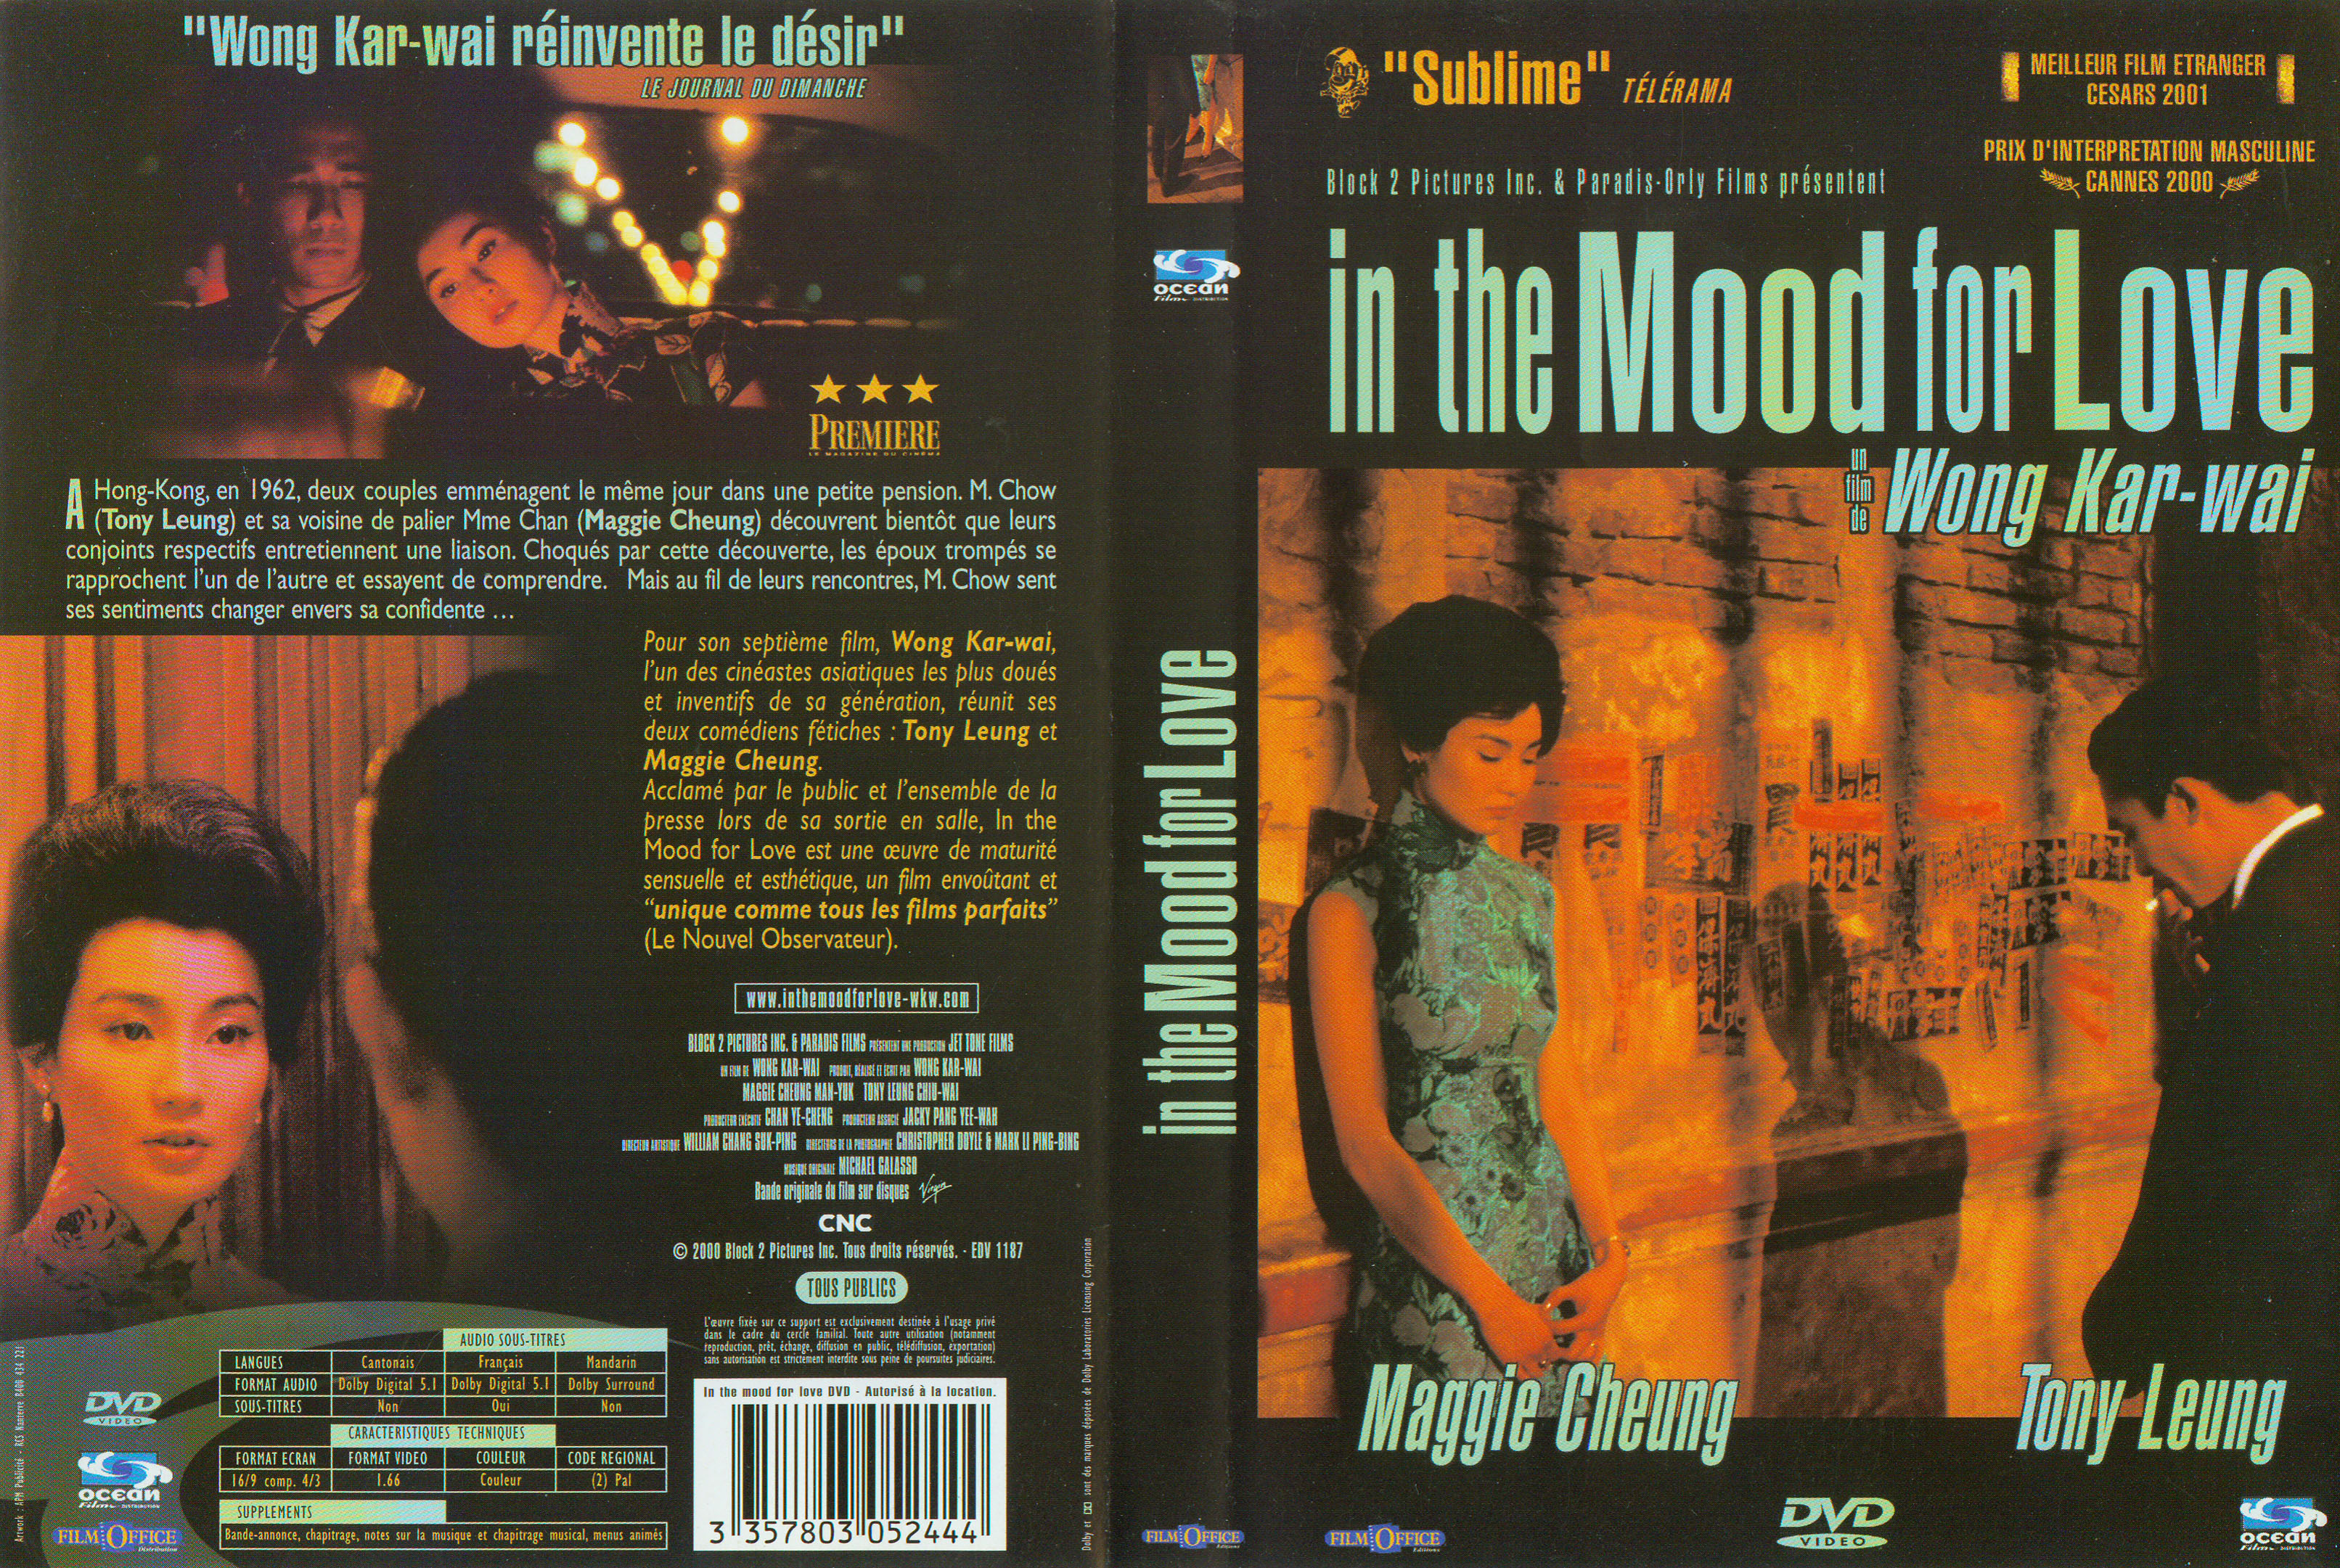 Jaquette DVD In the mood for love v2